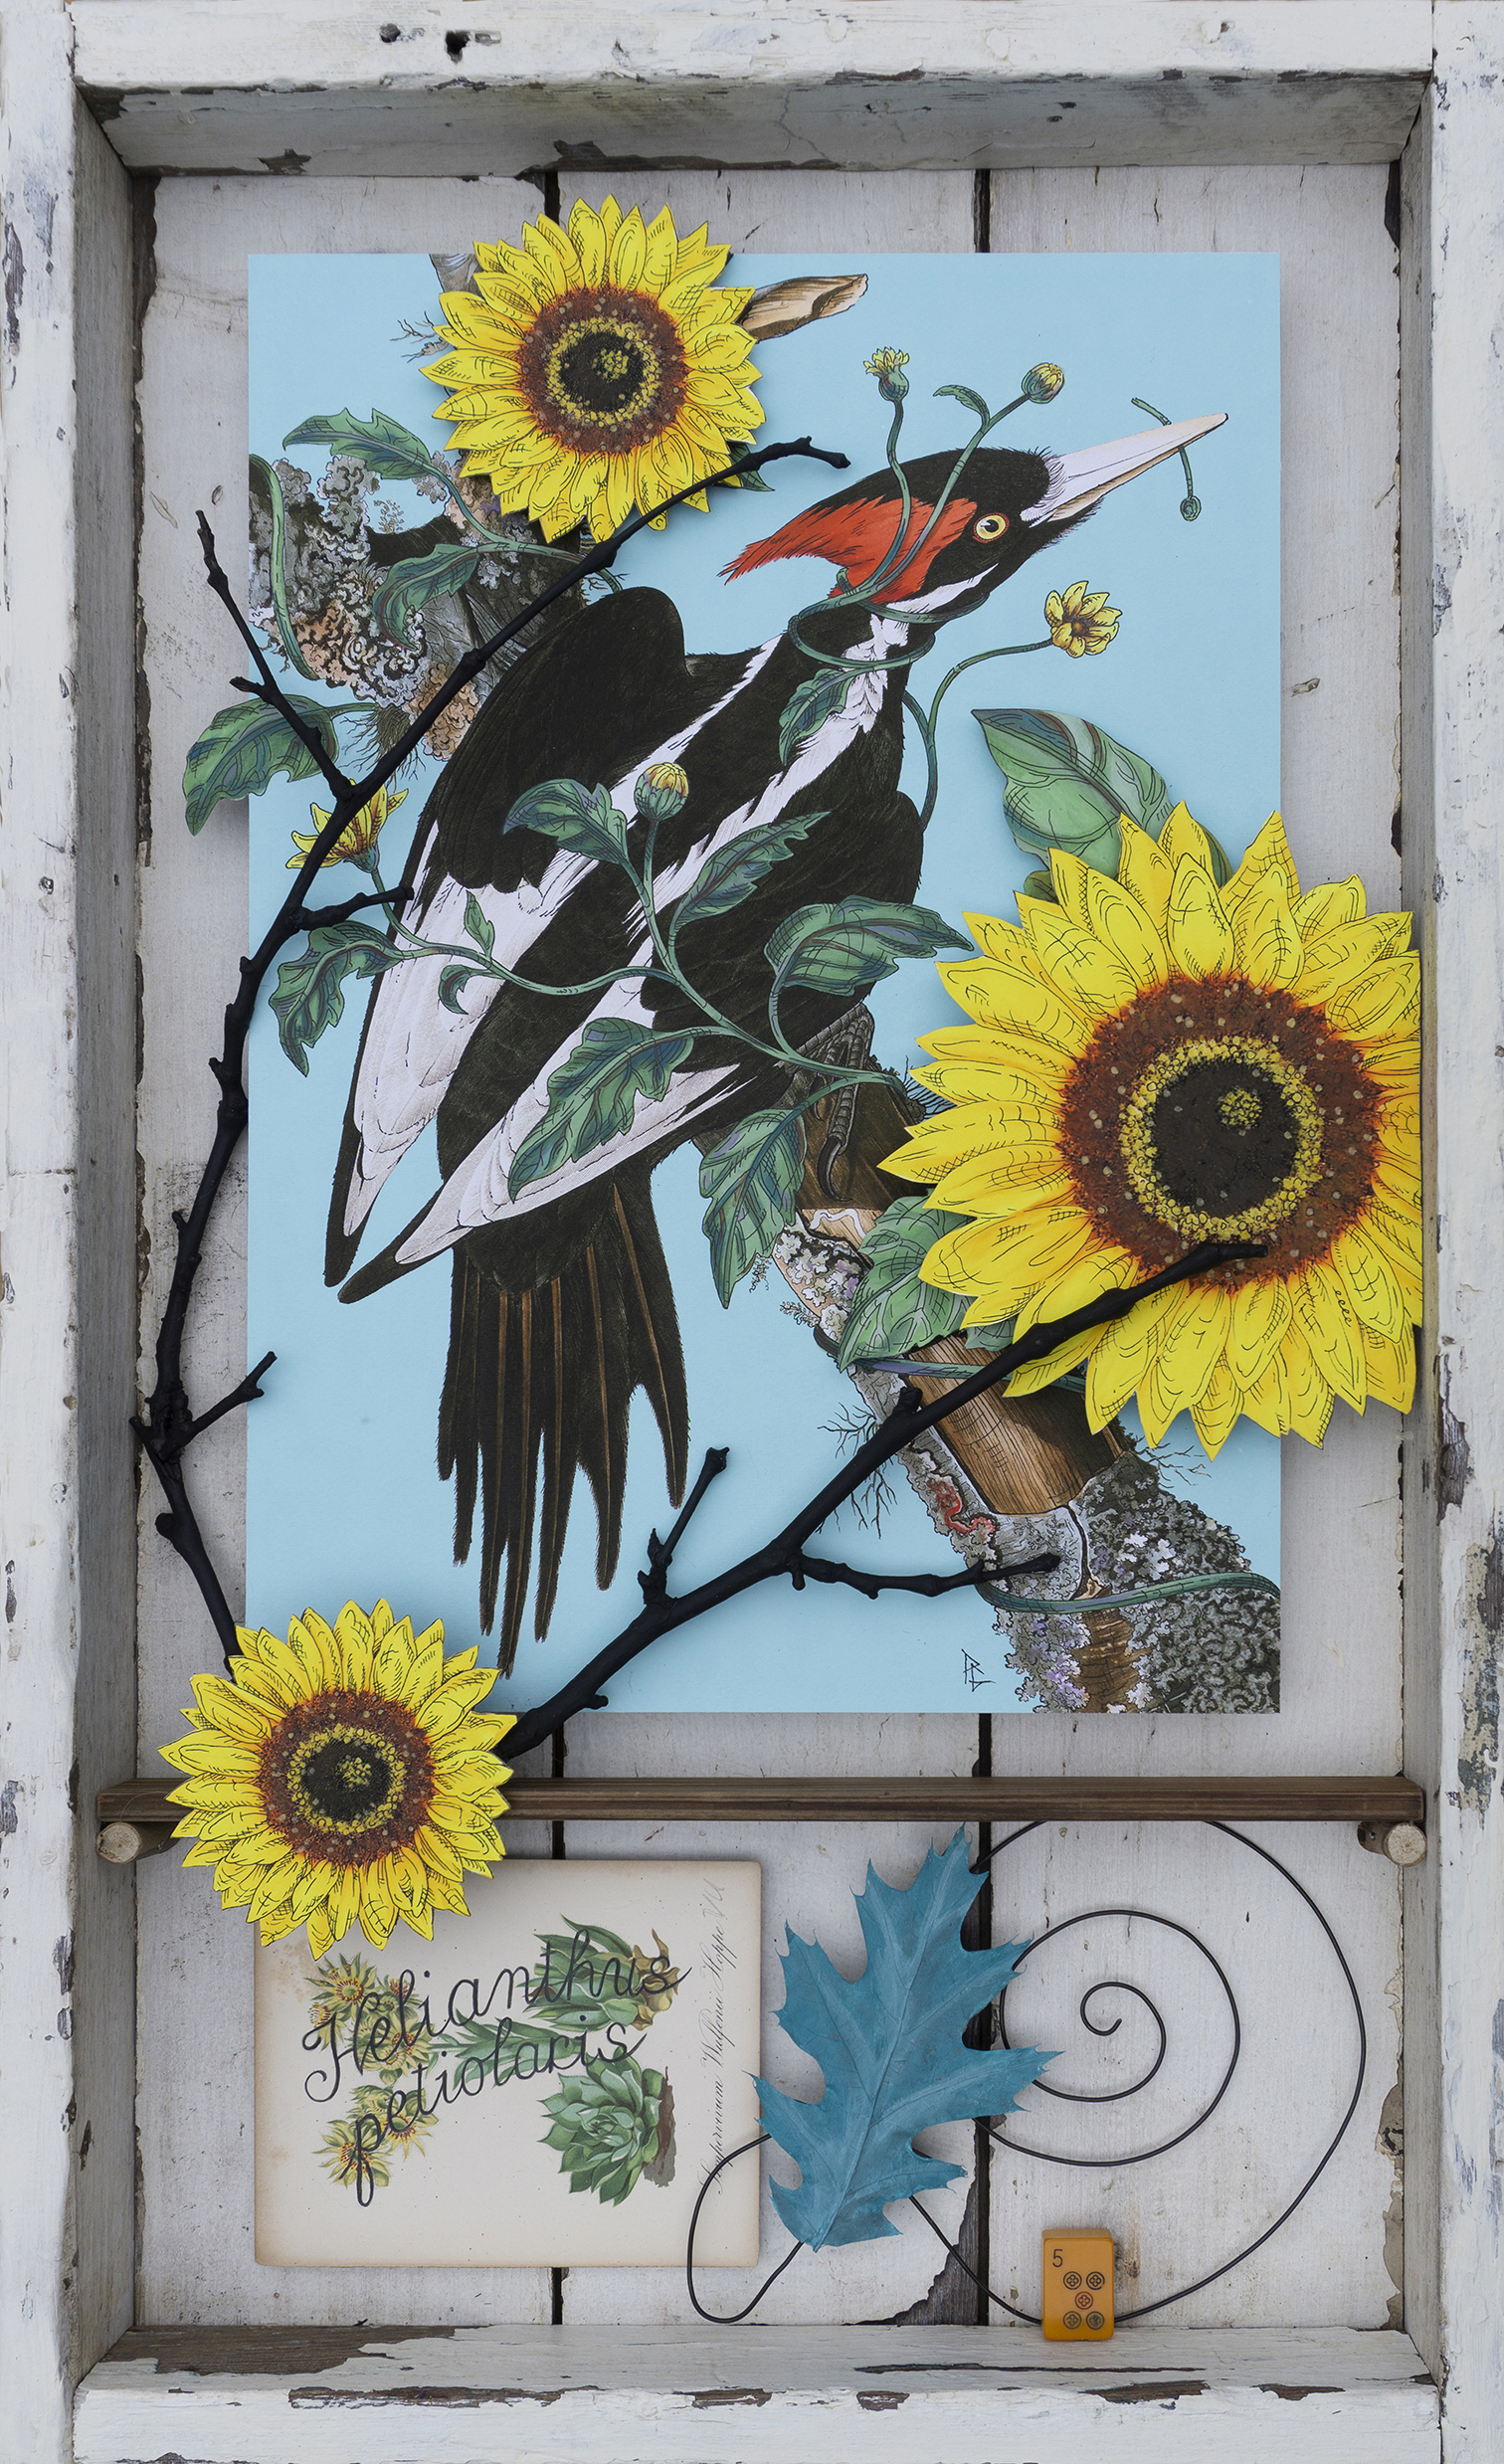 
		                					Penelope Gottlieb		                																	
																											<i>Helianthus petiolaris (Ivory Billed Woodpecker),</i>  
																																								2022, 
																																								acrylic, ink, wire and wood over a digital reproduction of an Audubon print, 
																																								29 x 17 1/2 inches 
																								
		                				